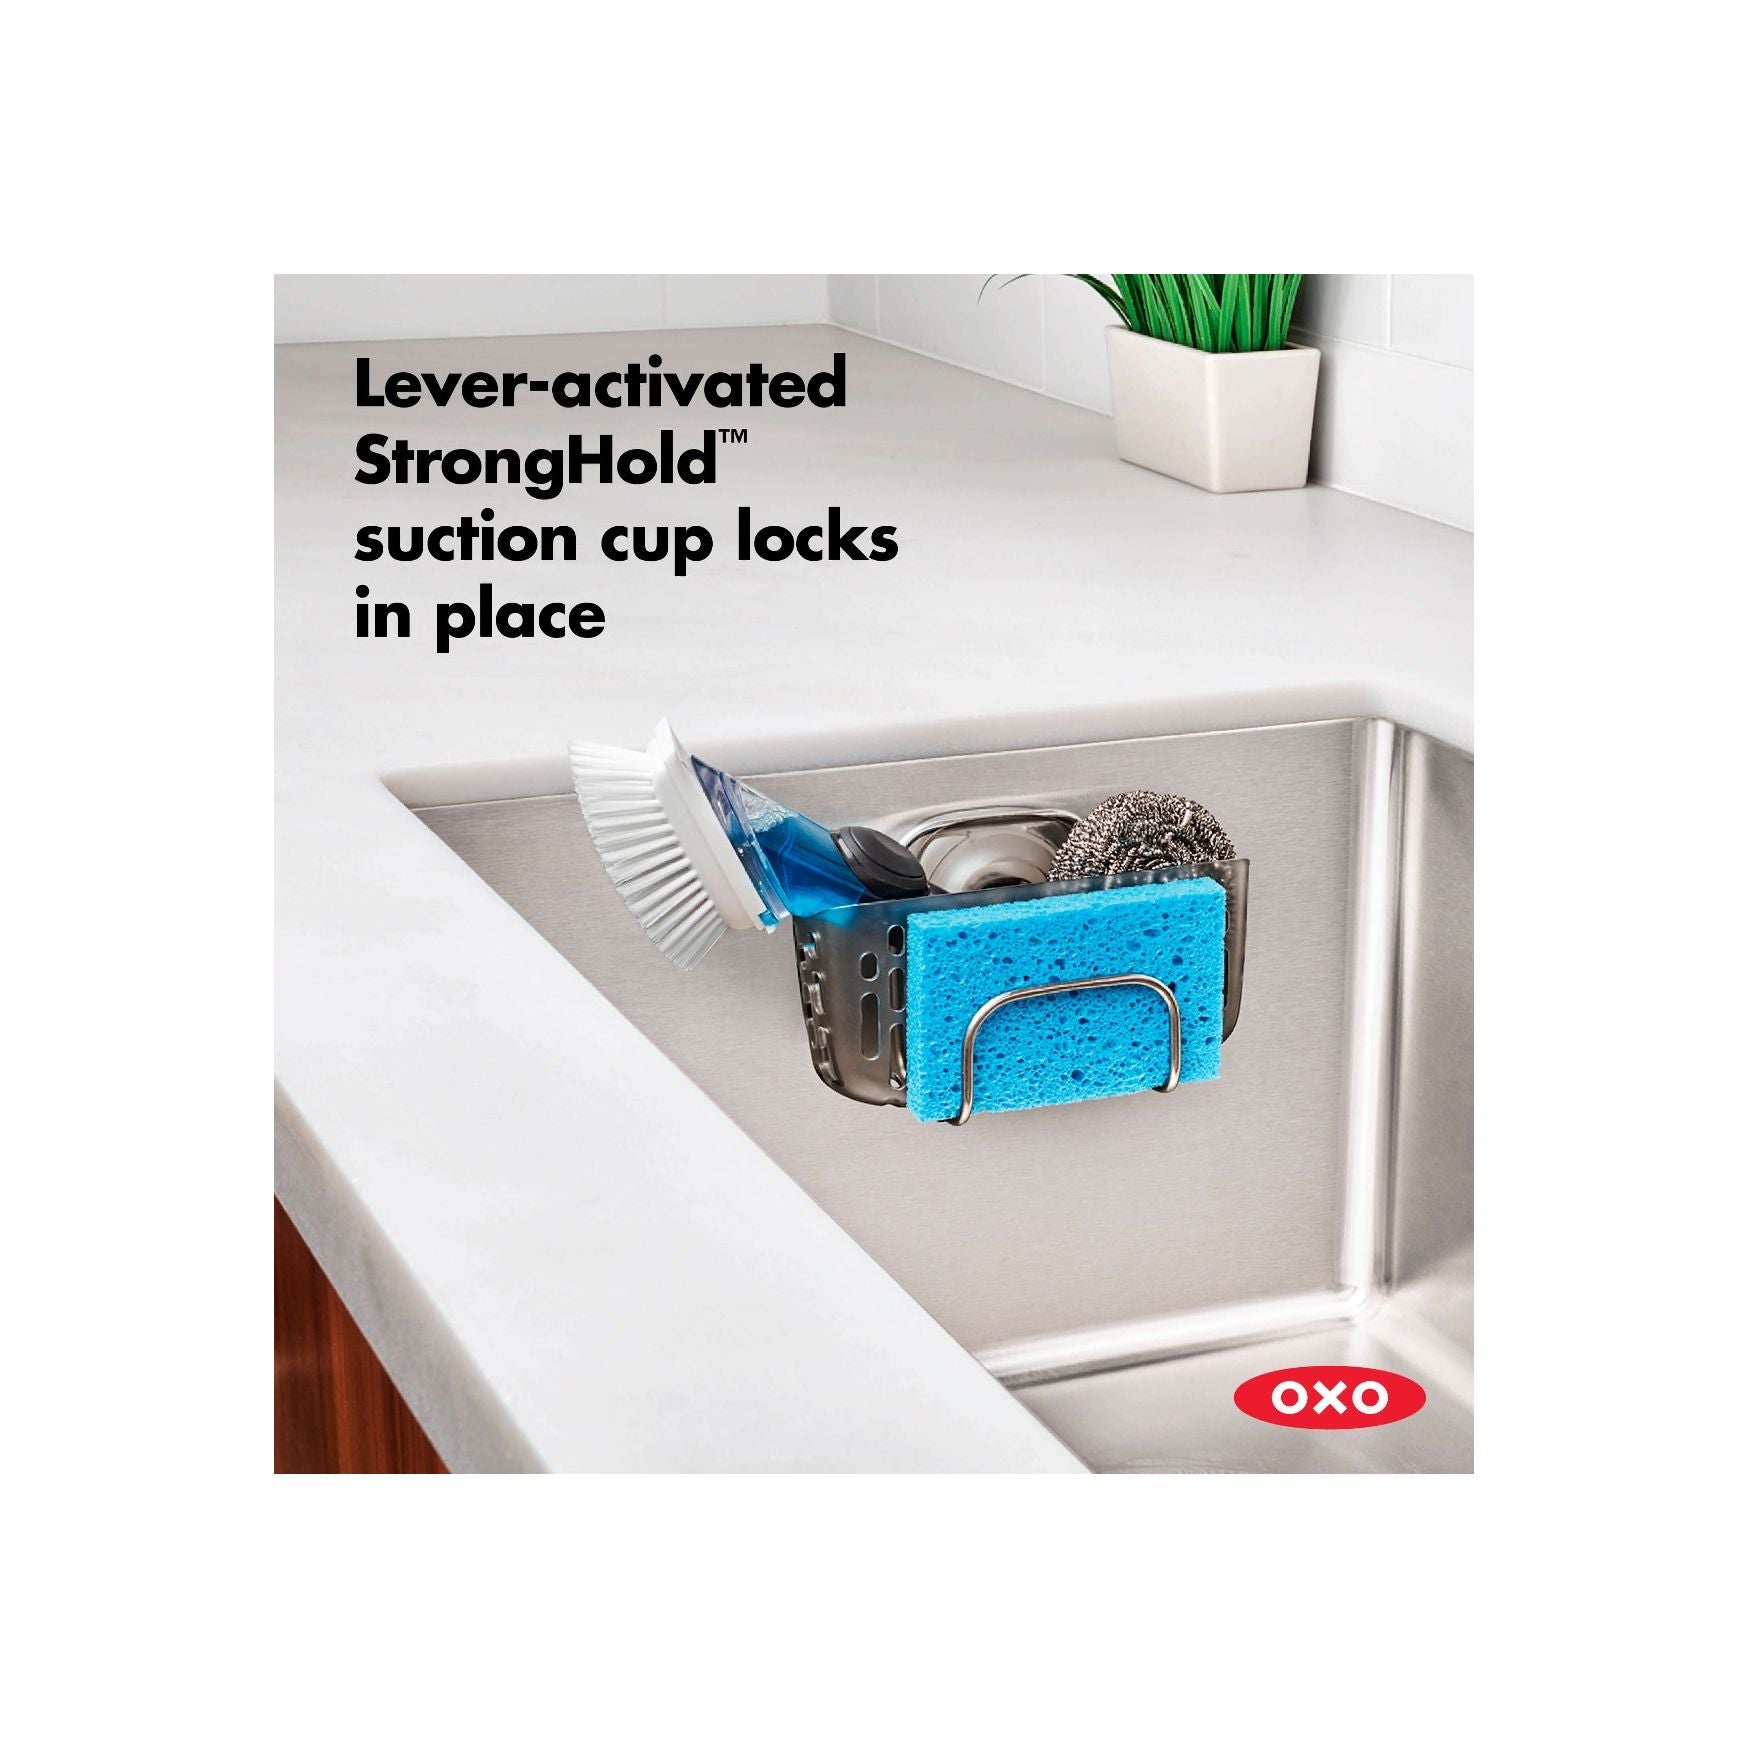 OXO StrongHold Suction Sink Caddy – The Cook's Nook